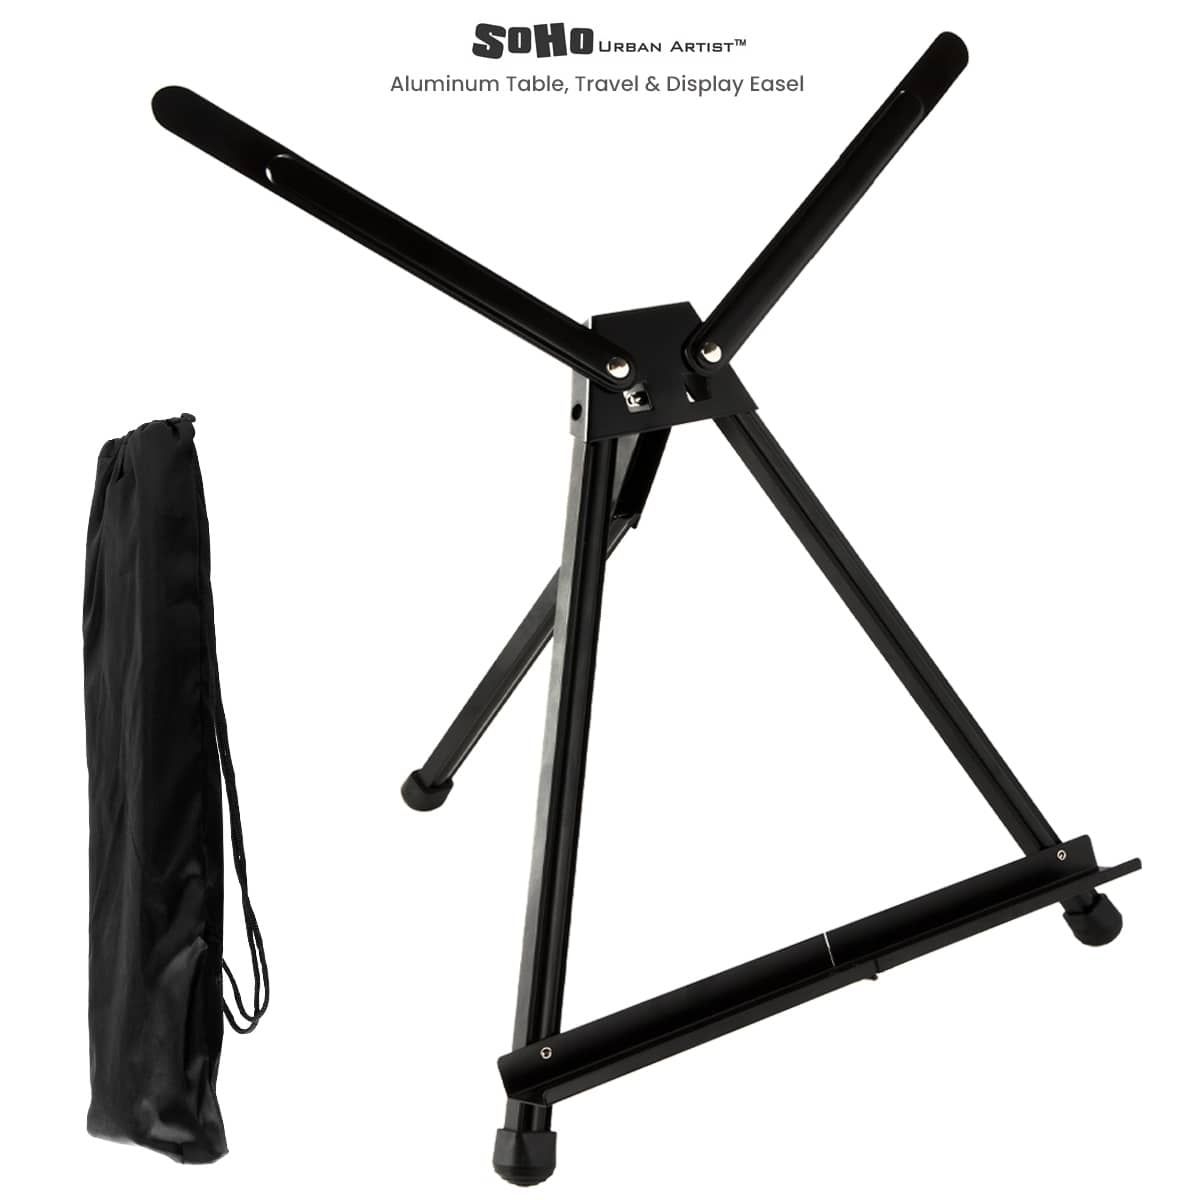 SoHo Aluminum Table Easel with Carry Case Bag